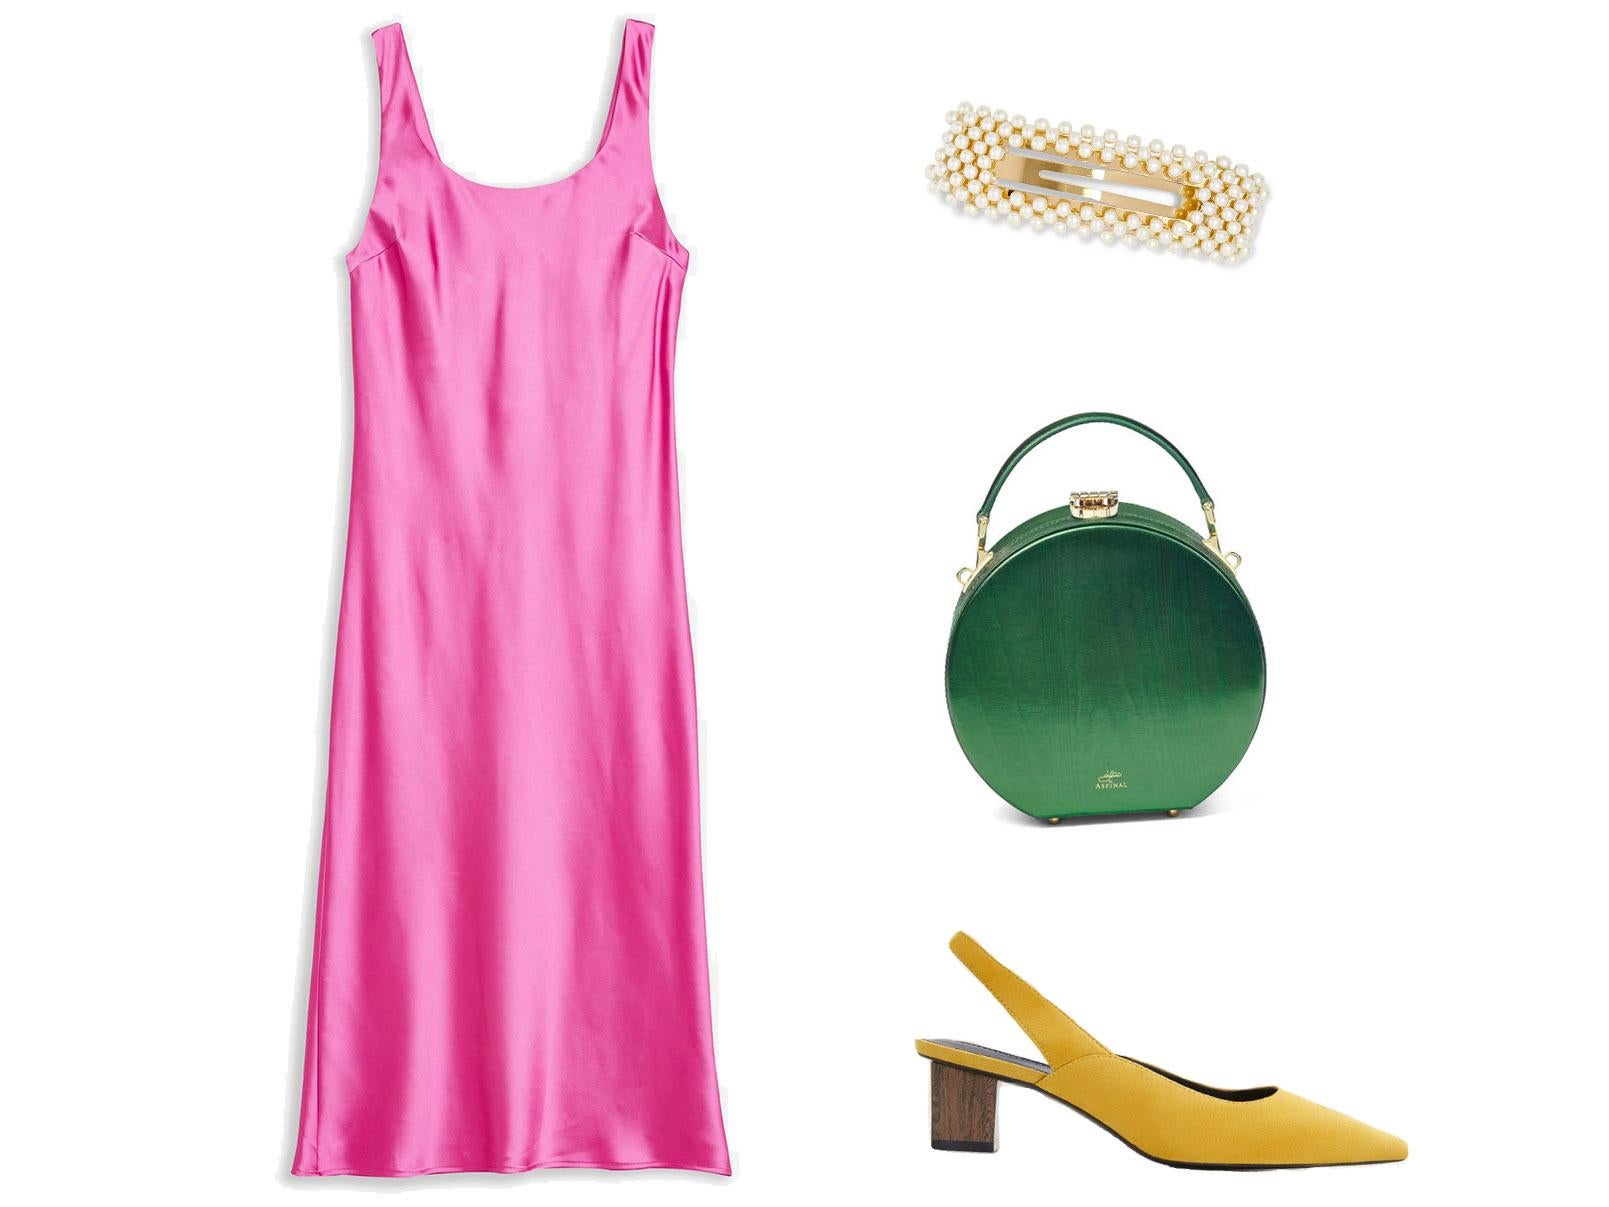 Pink Built Up Slip Dress, £35, Topshop; Jennifer Behr, Valerie gold-tone faux pearl hair clip, £51, Net-a-Porter; Giles x Aspinal Mini Hat Box, £275, Aspinal of London; Heel Leather Shoes, £49.99, Mango